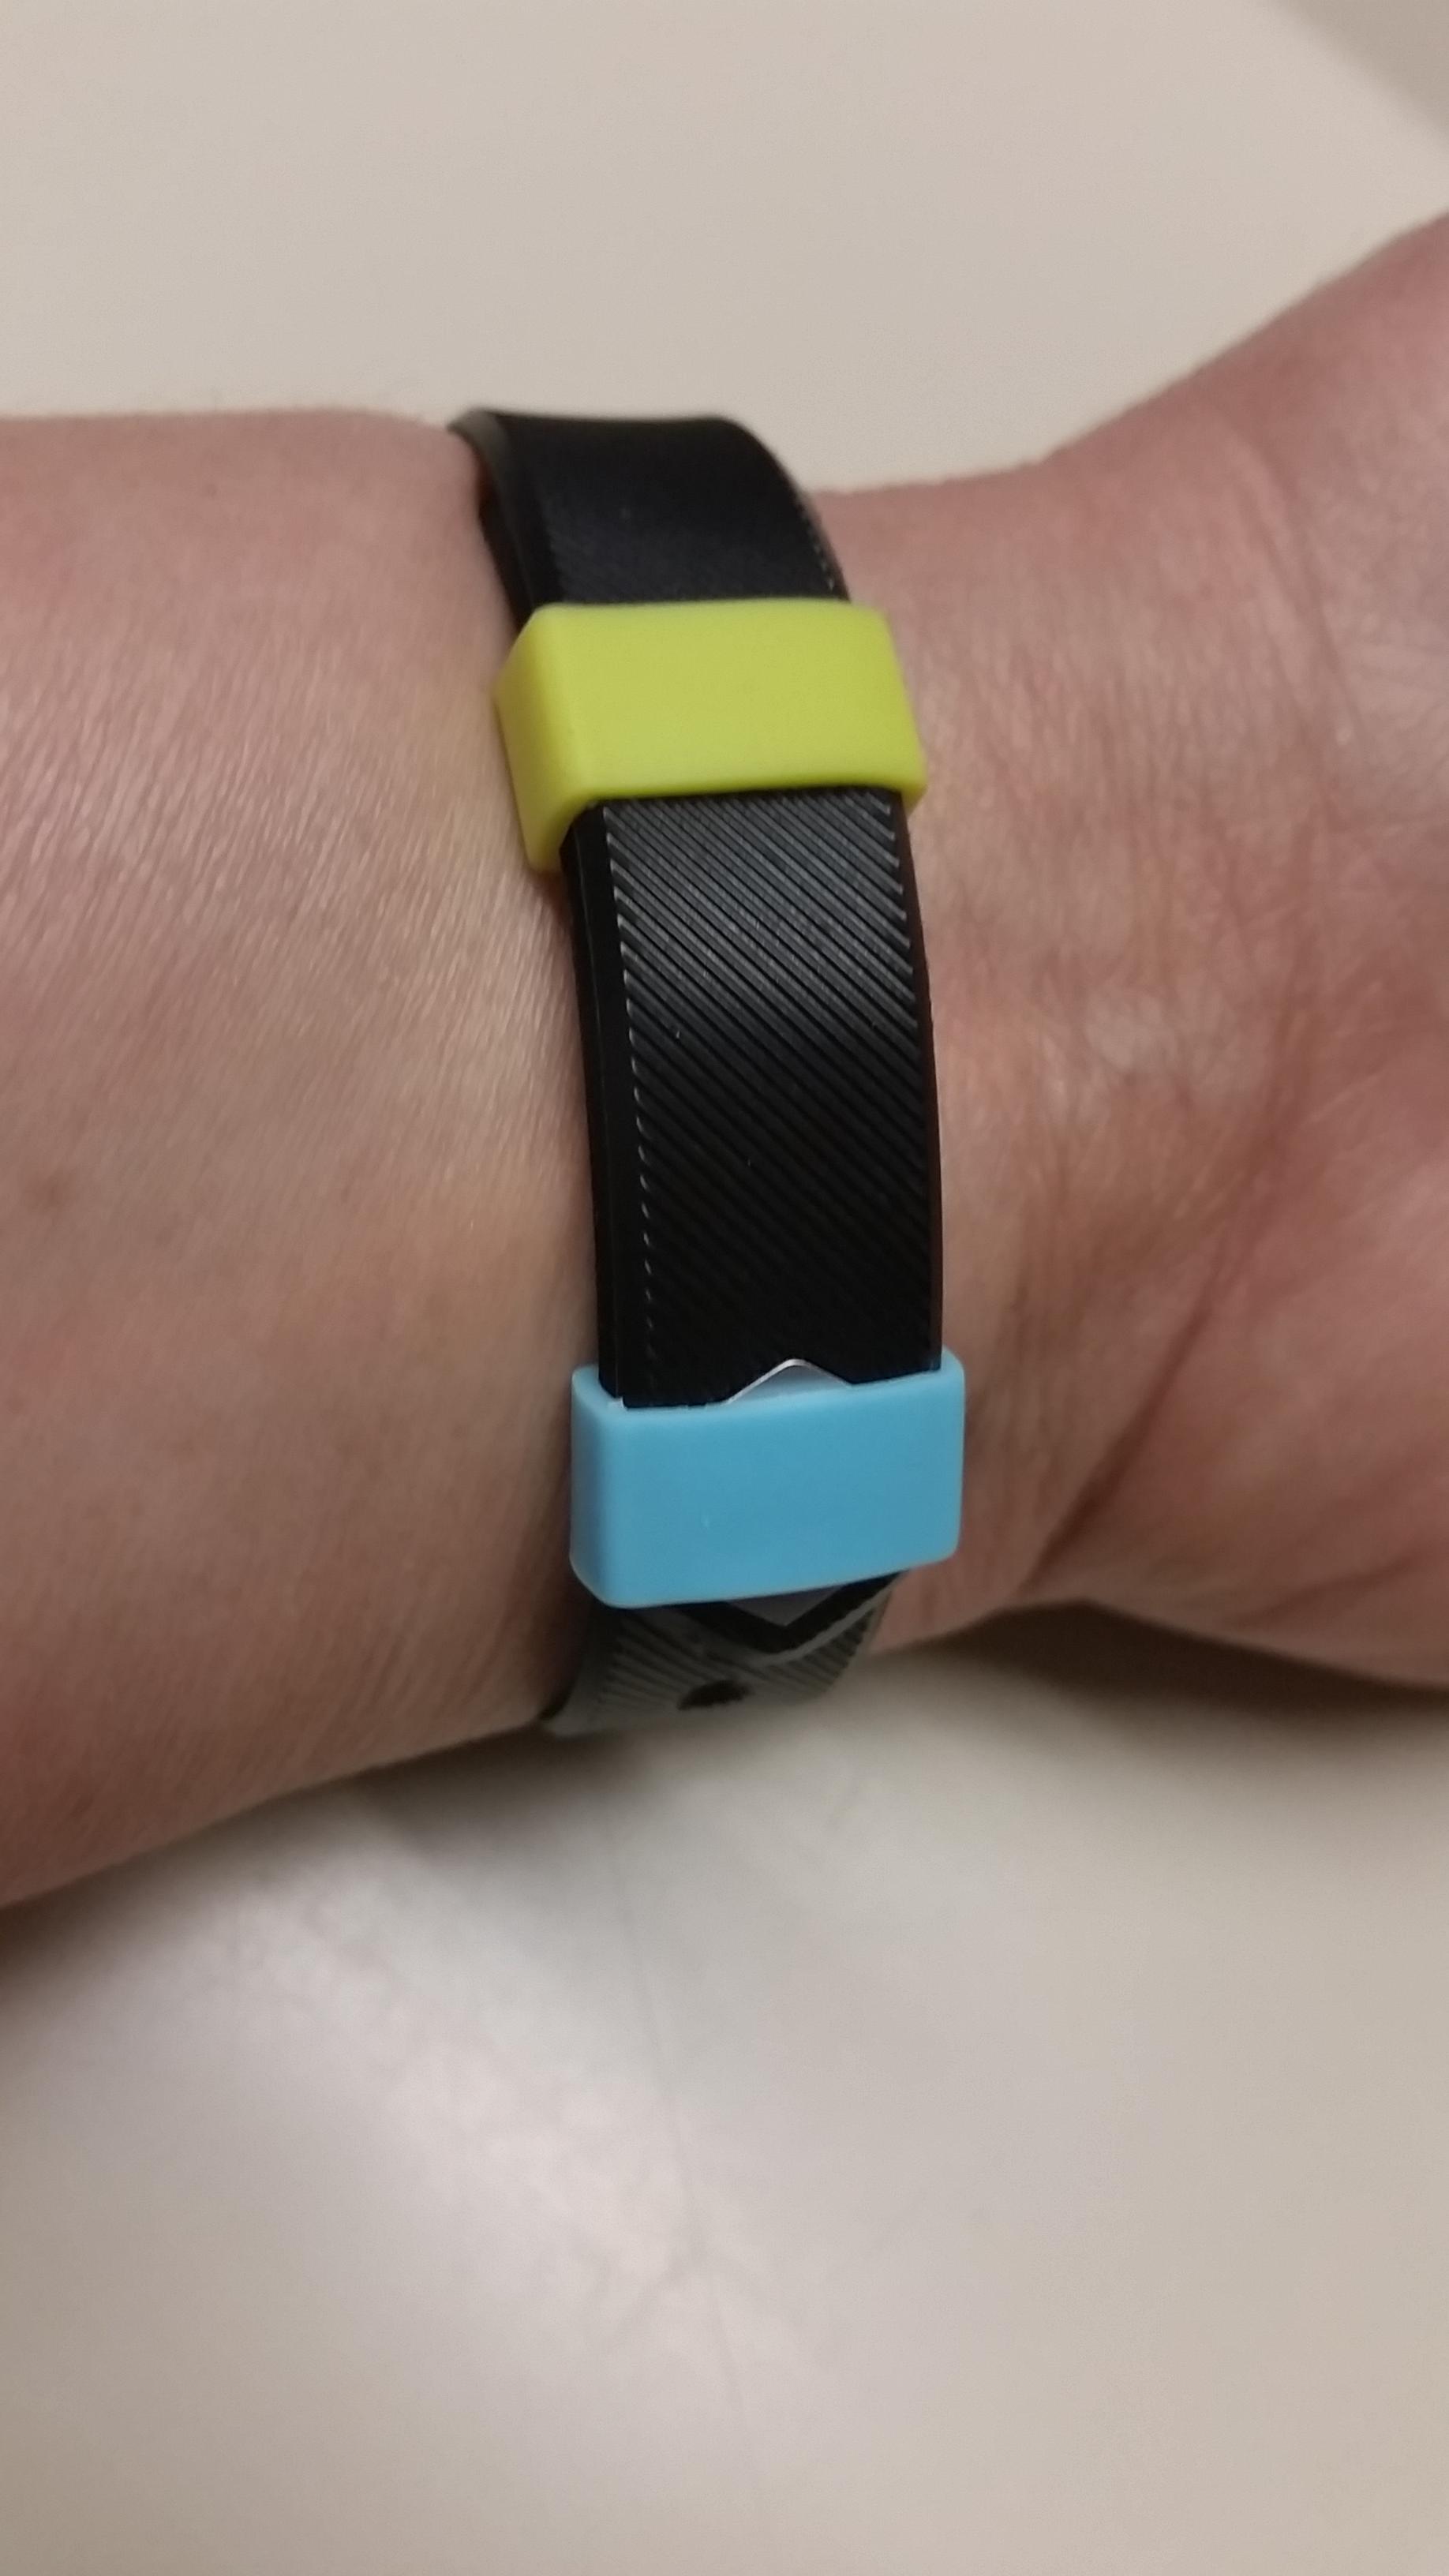 Solved: Fitbit Alta Fell Off \u0026 Now Lost 